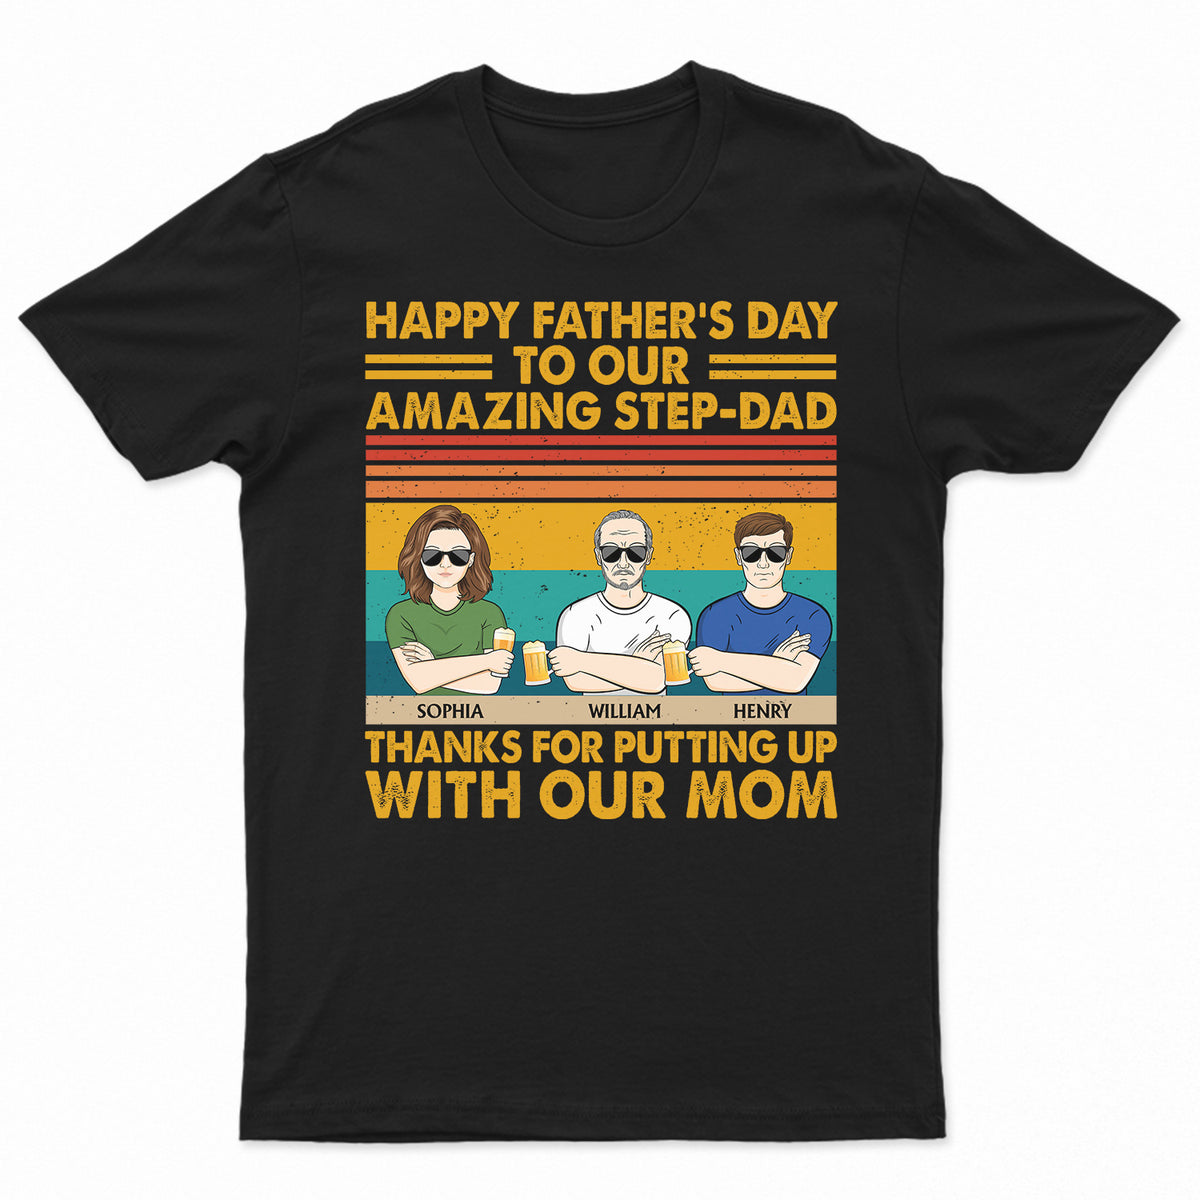 To Our Amazing Step-Dad Thanks For Putting Up With Our Mom Adult